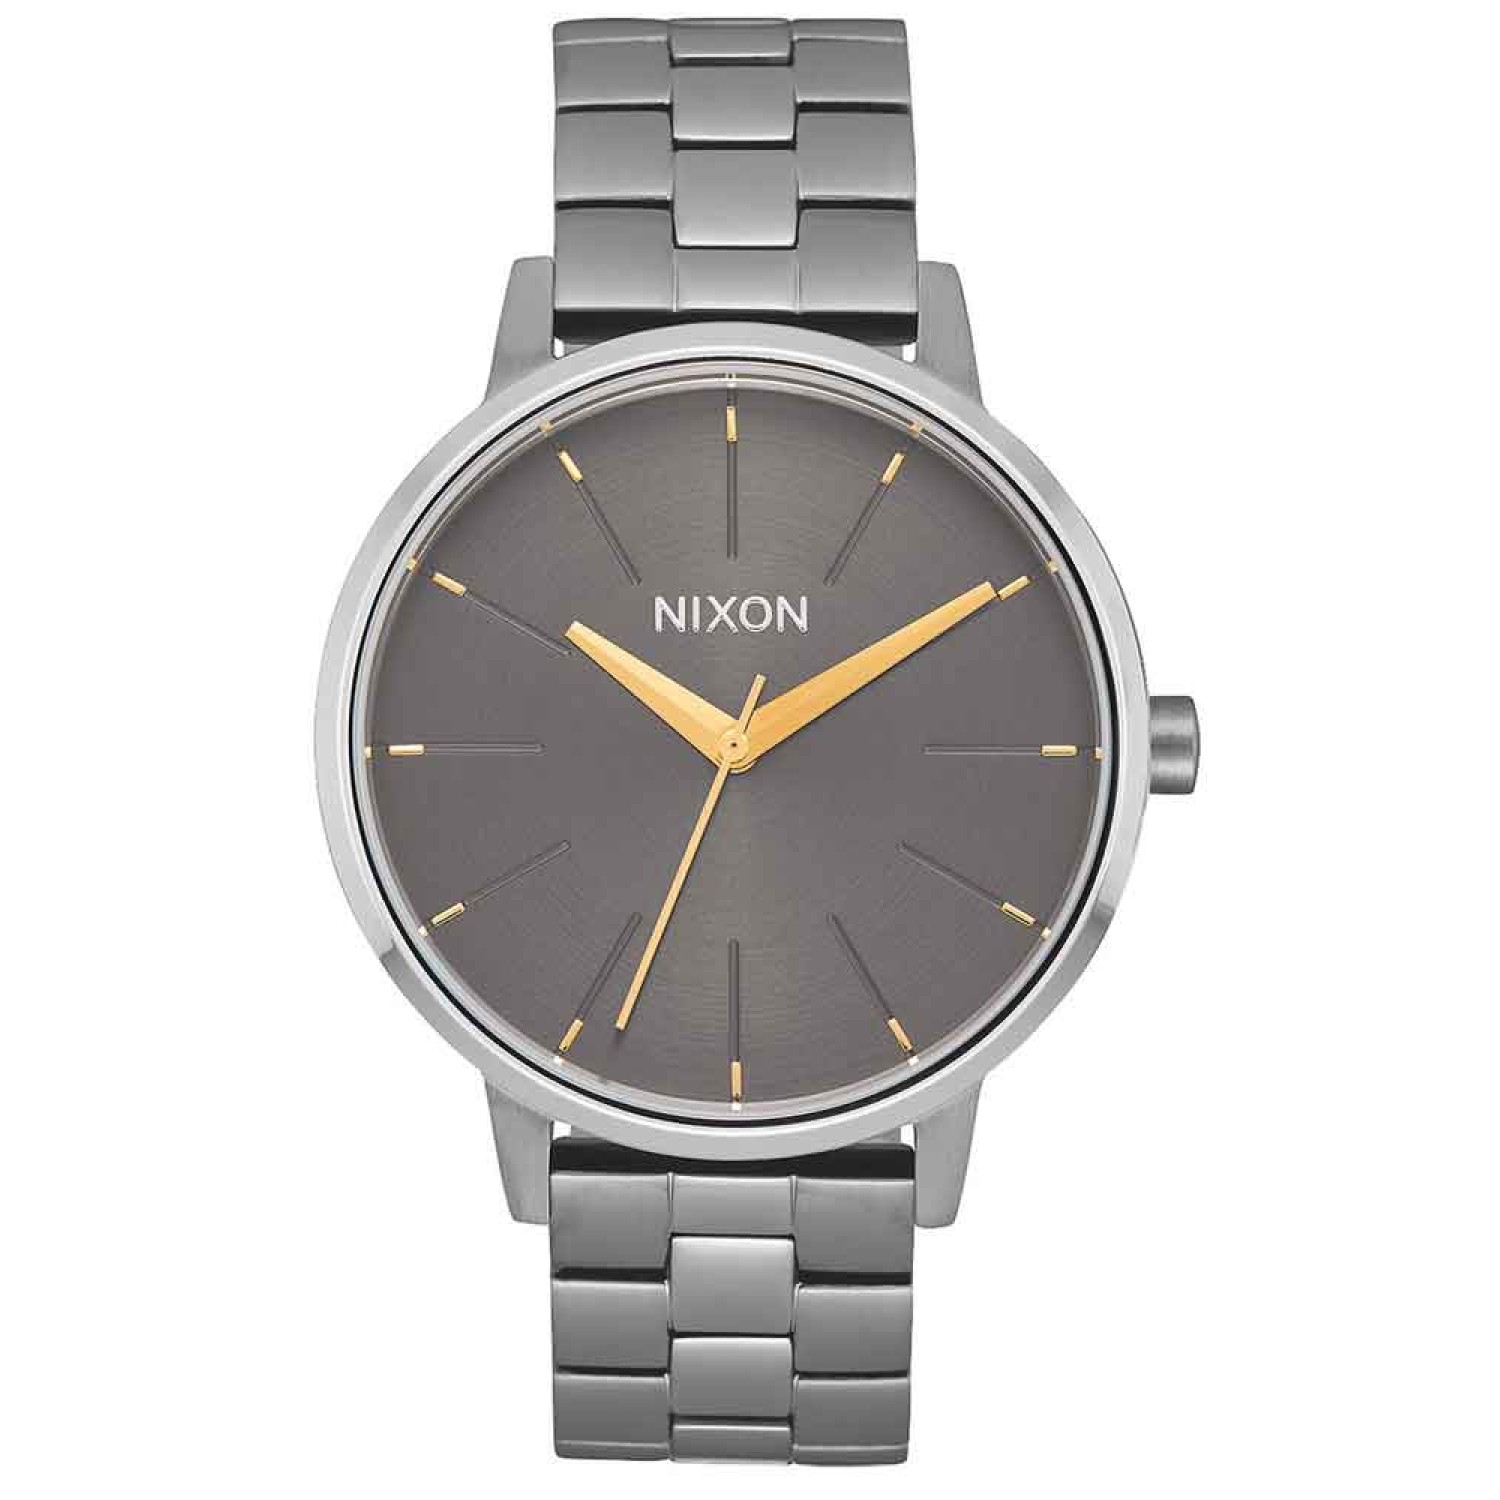 A099100 NIXON Ladies The Kensington Grey Watch. This elegant  ladies A099100 Nixon The Kensington watch is made from stainless steel and is fitted with a quartz movement. It fastens a silver metal bracelet and has a grey Mother of pearl dial. 2 Ye @christ